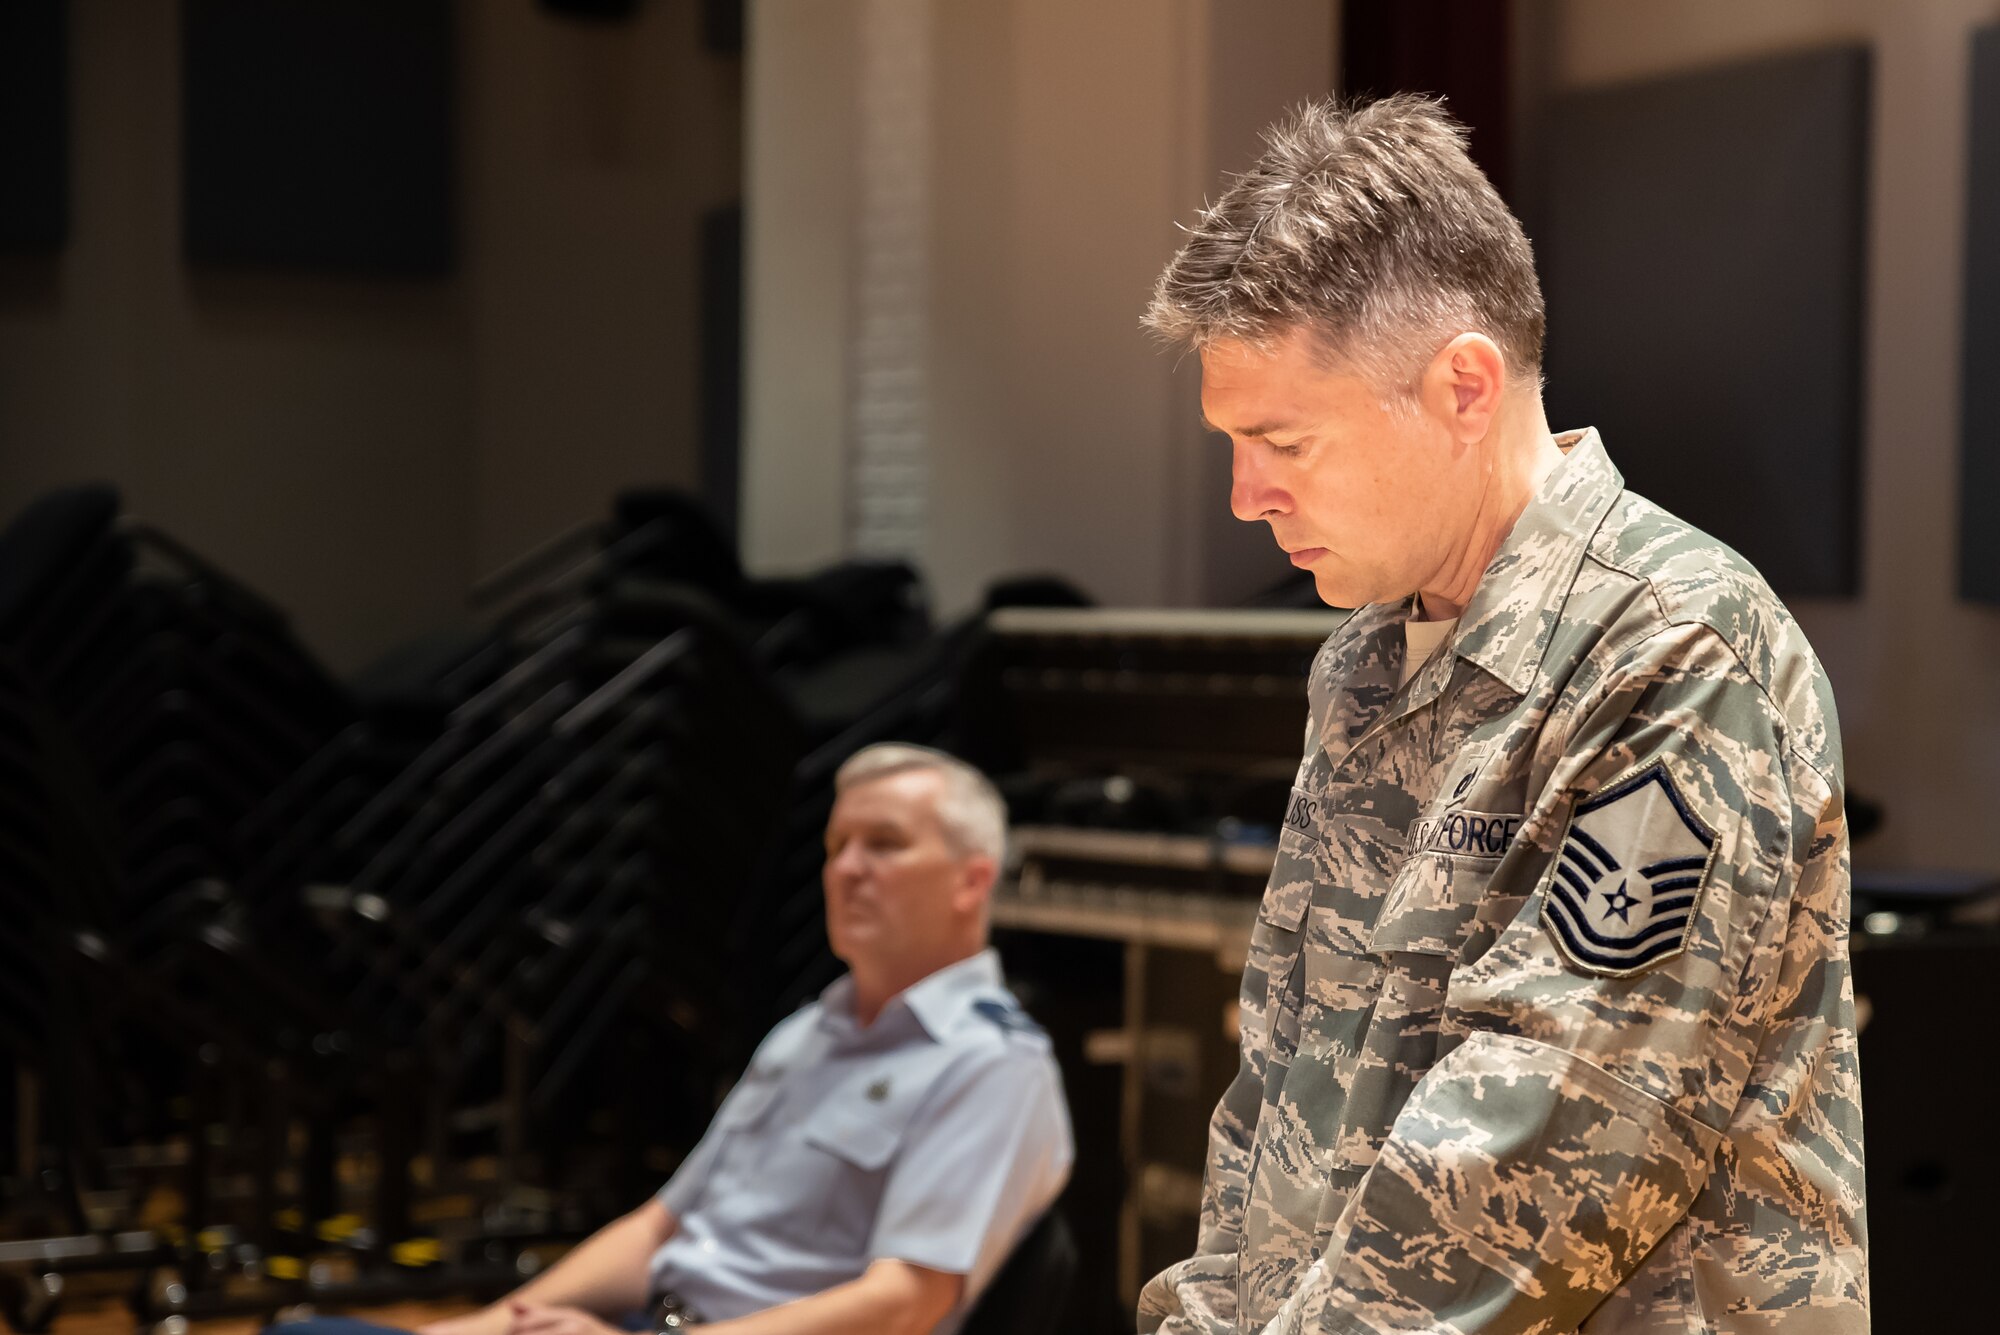 Staff Arranger Master Sgt. John Bliss overlooks a score to one of his arrangements during a rehearsal for the Fall 2019 tour